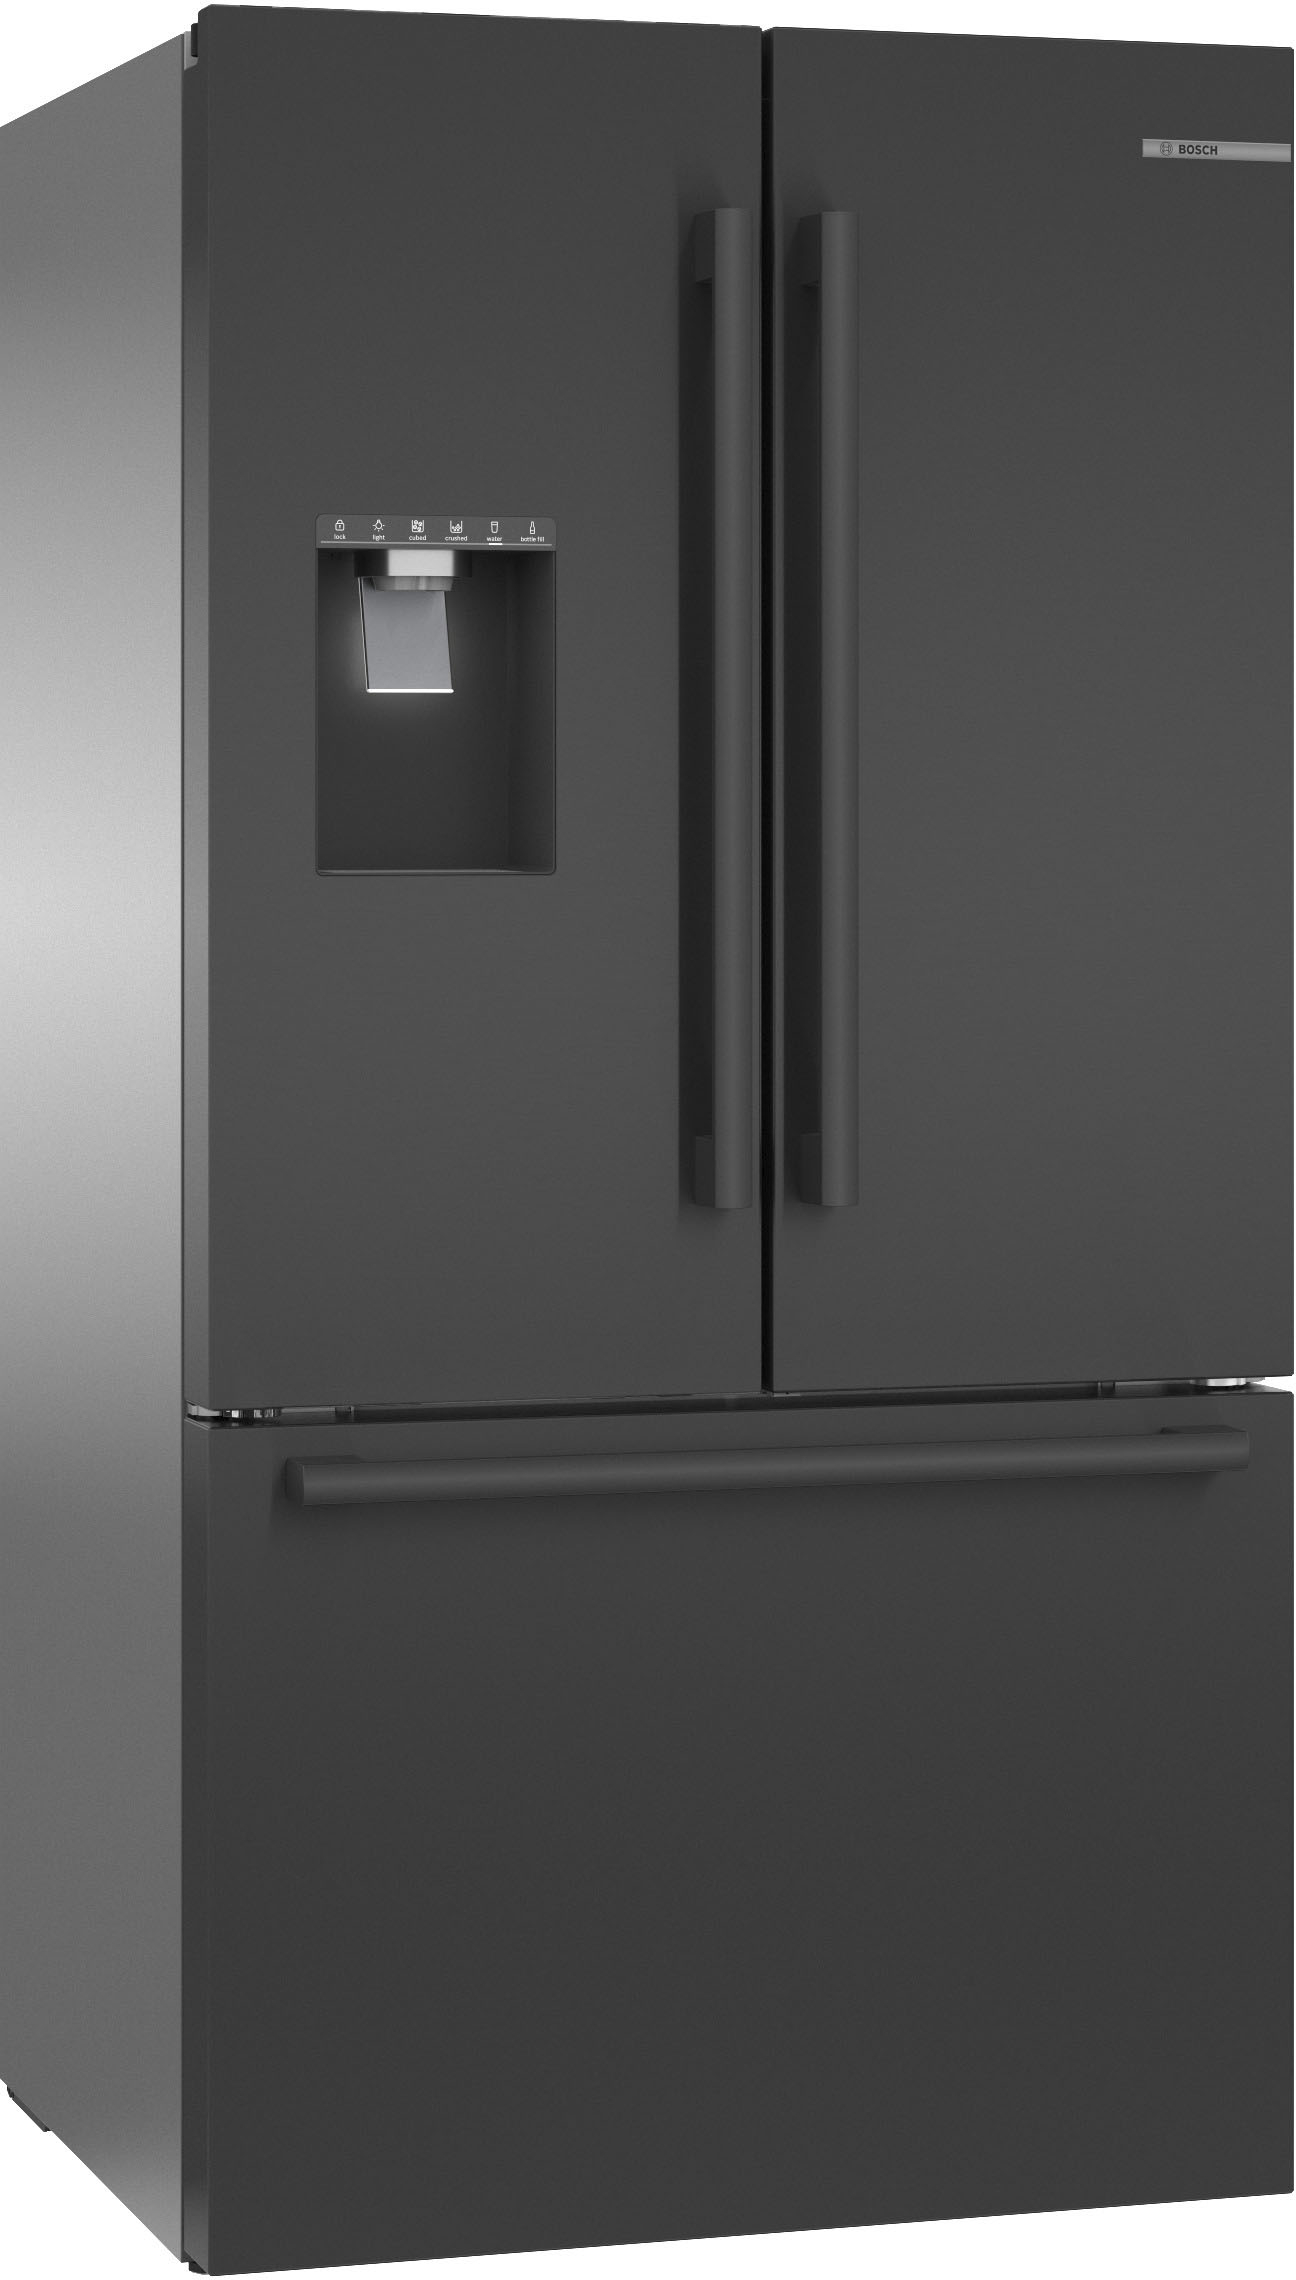 Angle View: Bosch - 500 Series 26 Cu. Ft. French Door Smart Refrigerator with External Water and Ice - Black Stainless Steel